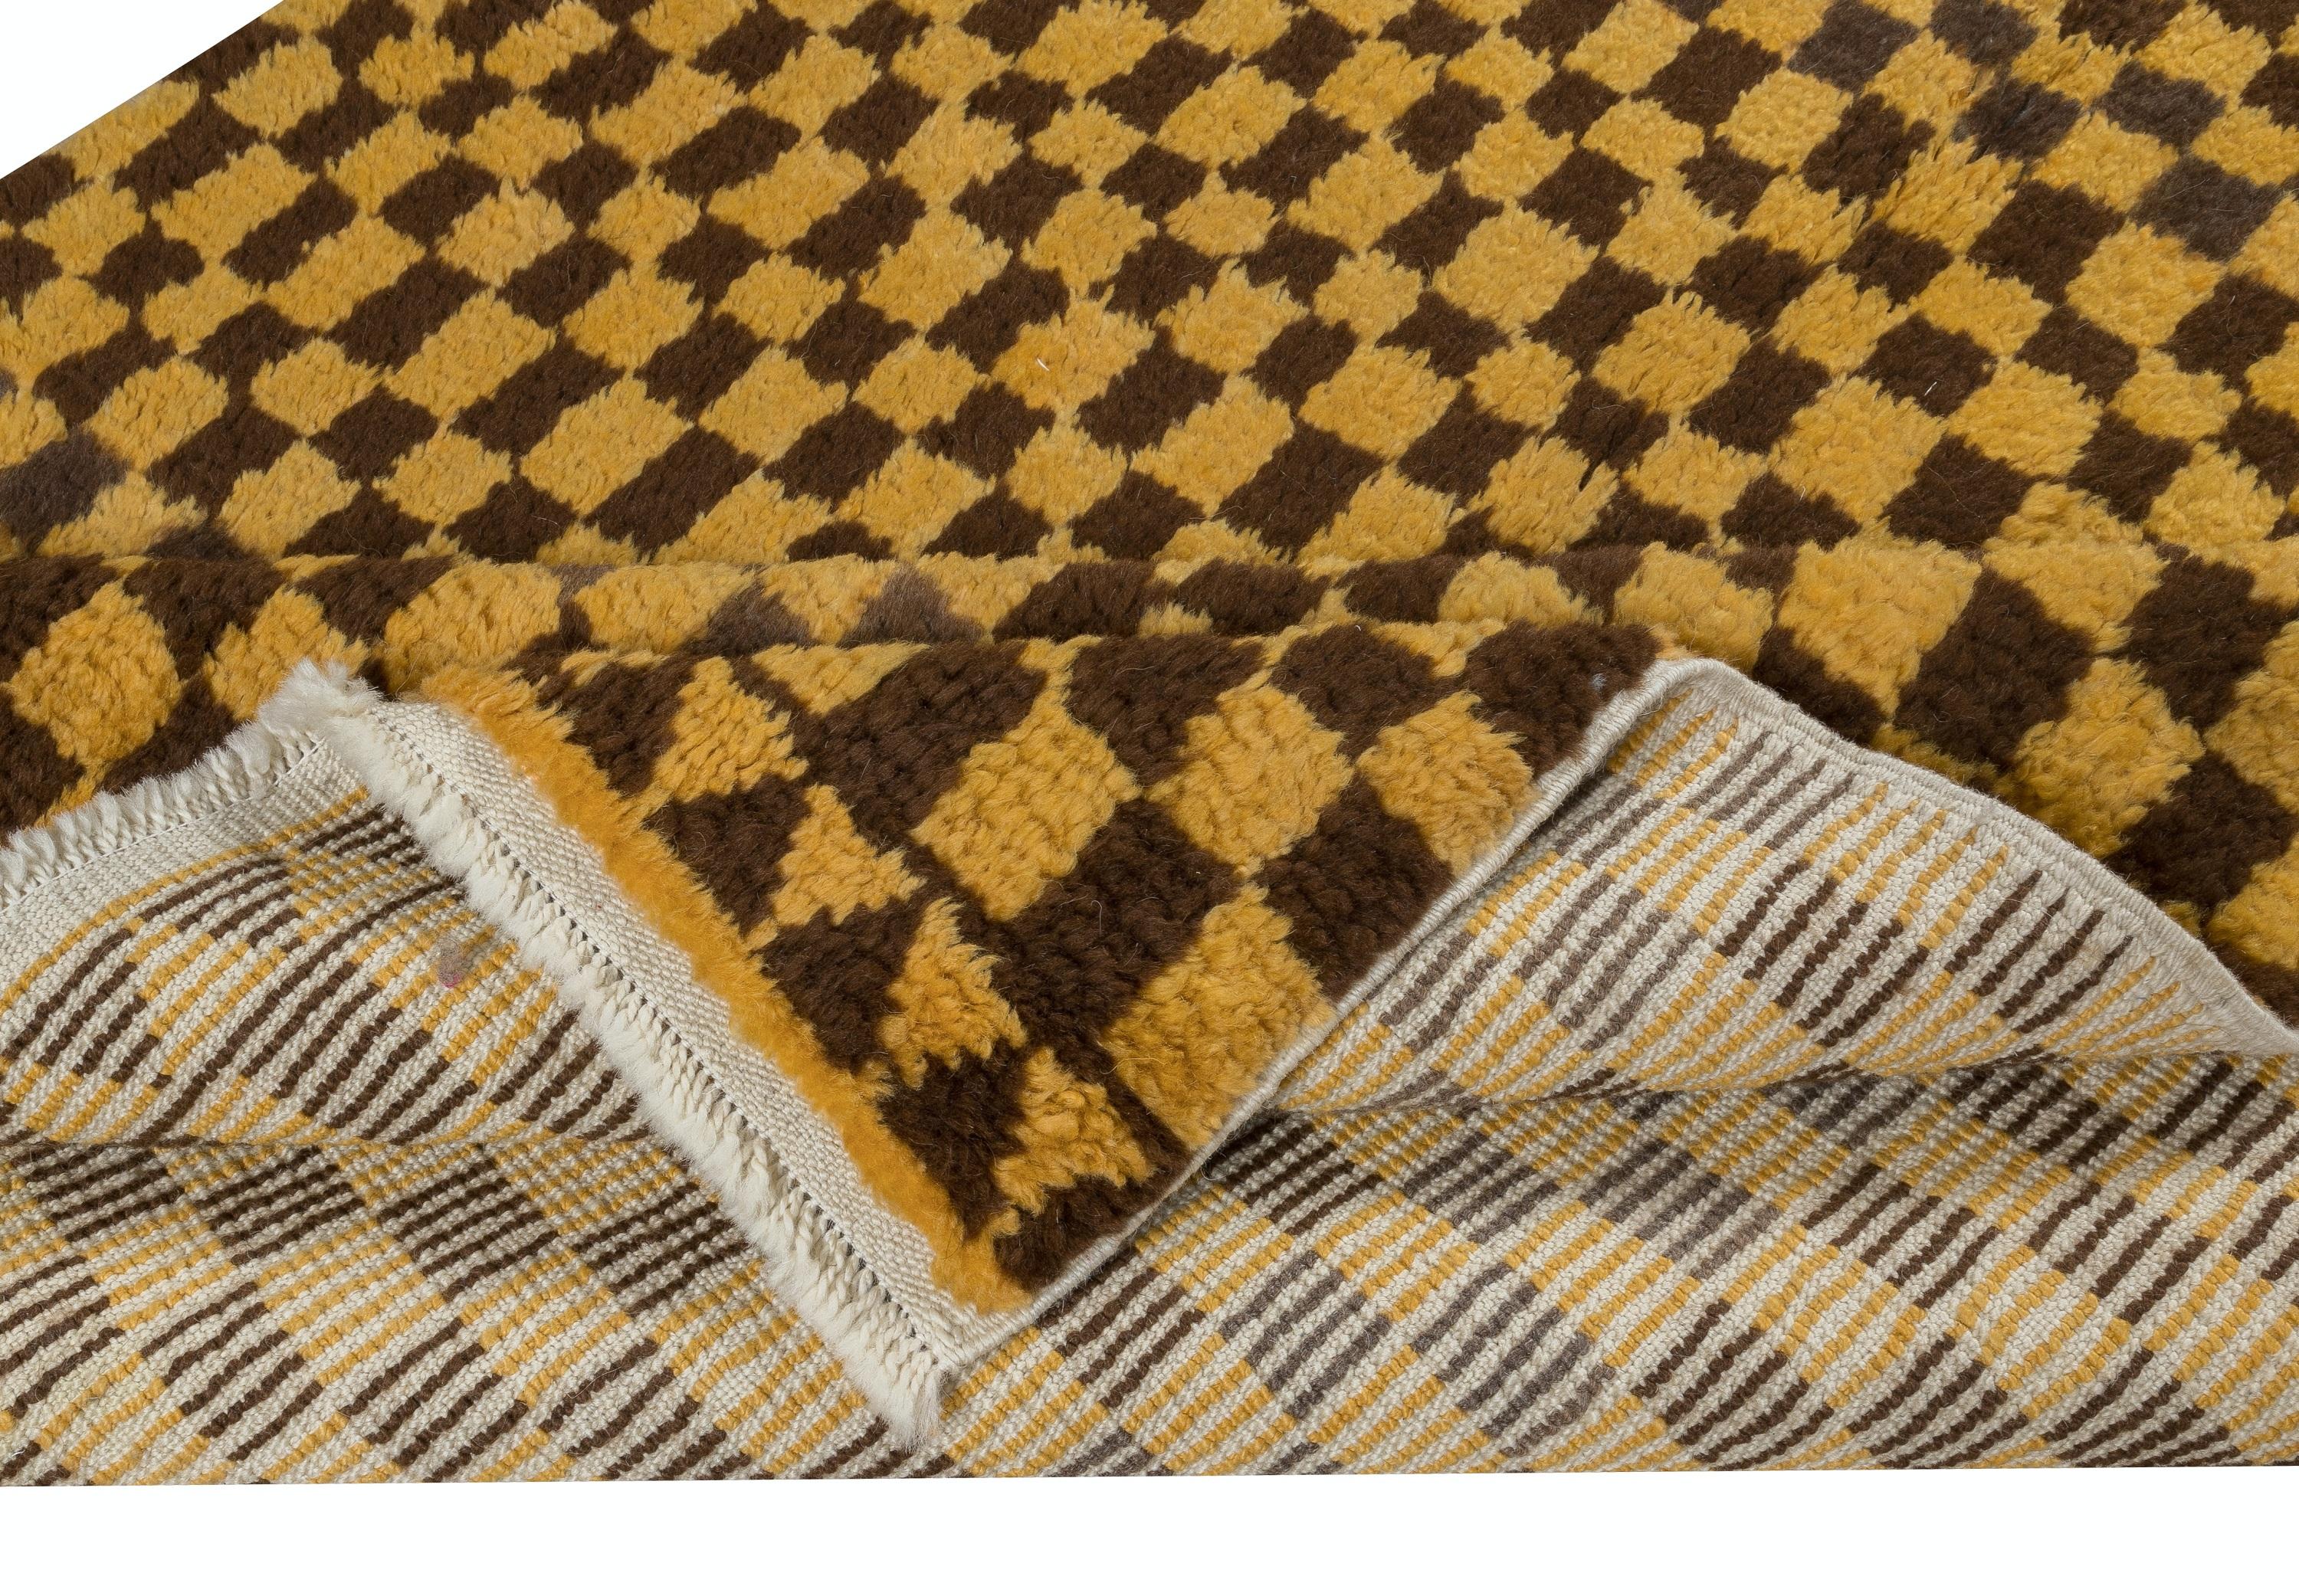 100% hand-spun wool of finest quality.

Available as seen or can be custom produced in any design, size, color combination and pile thickness requested. 

These beautiful hand-knotted rugs are produced from scratch in our atelier located in Central